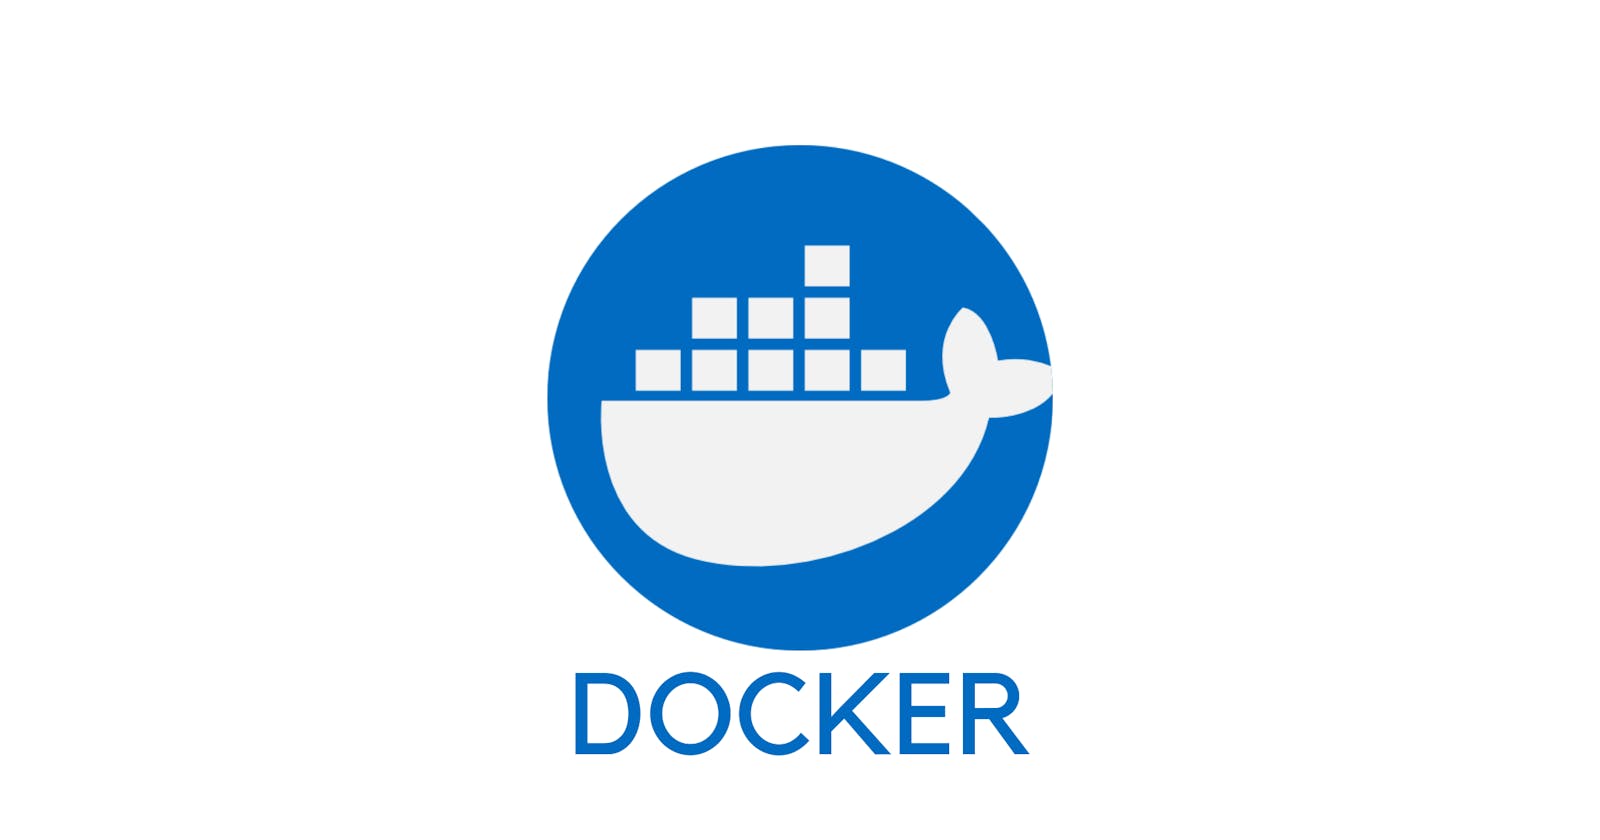 What is Docker and why is it important?